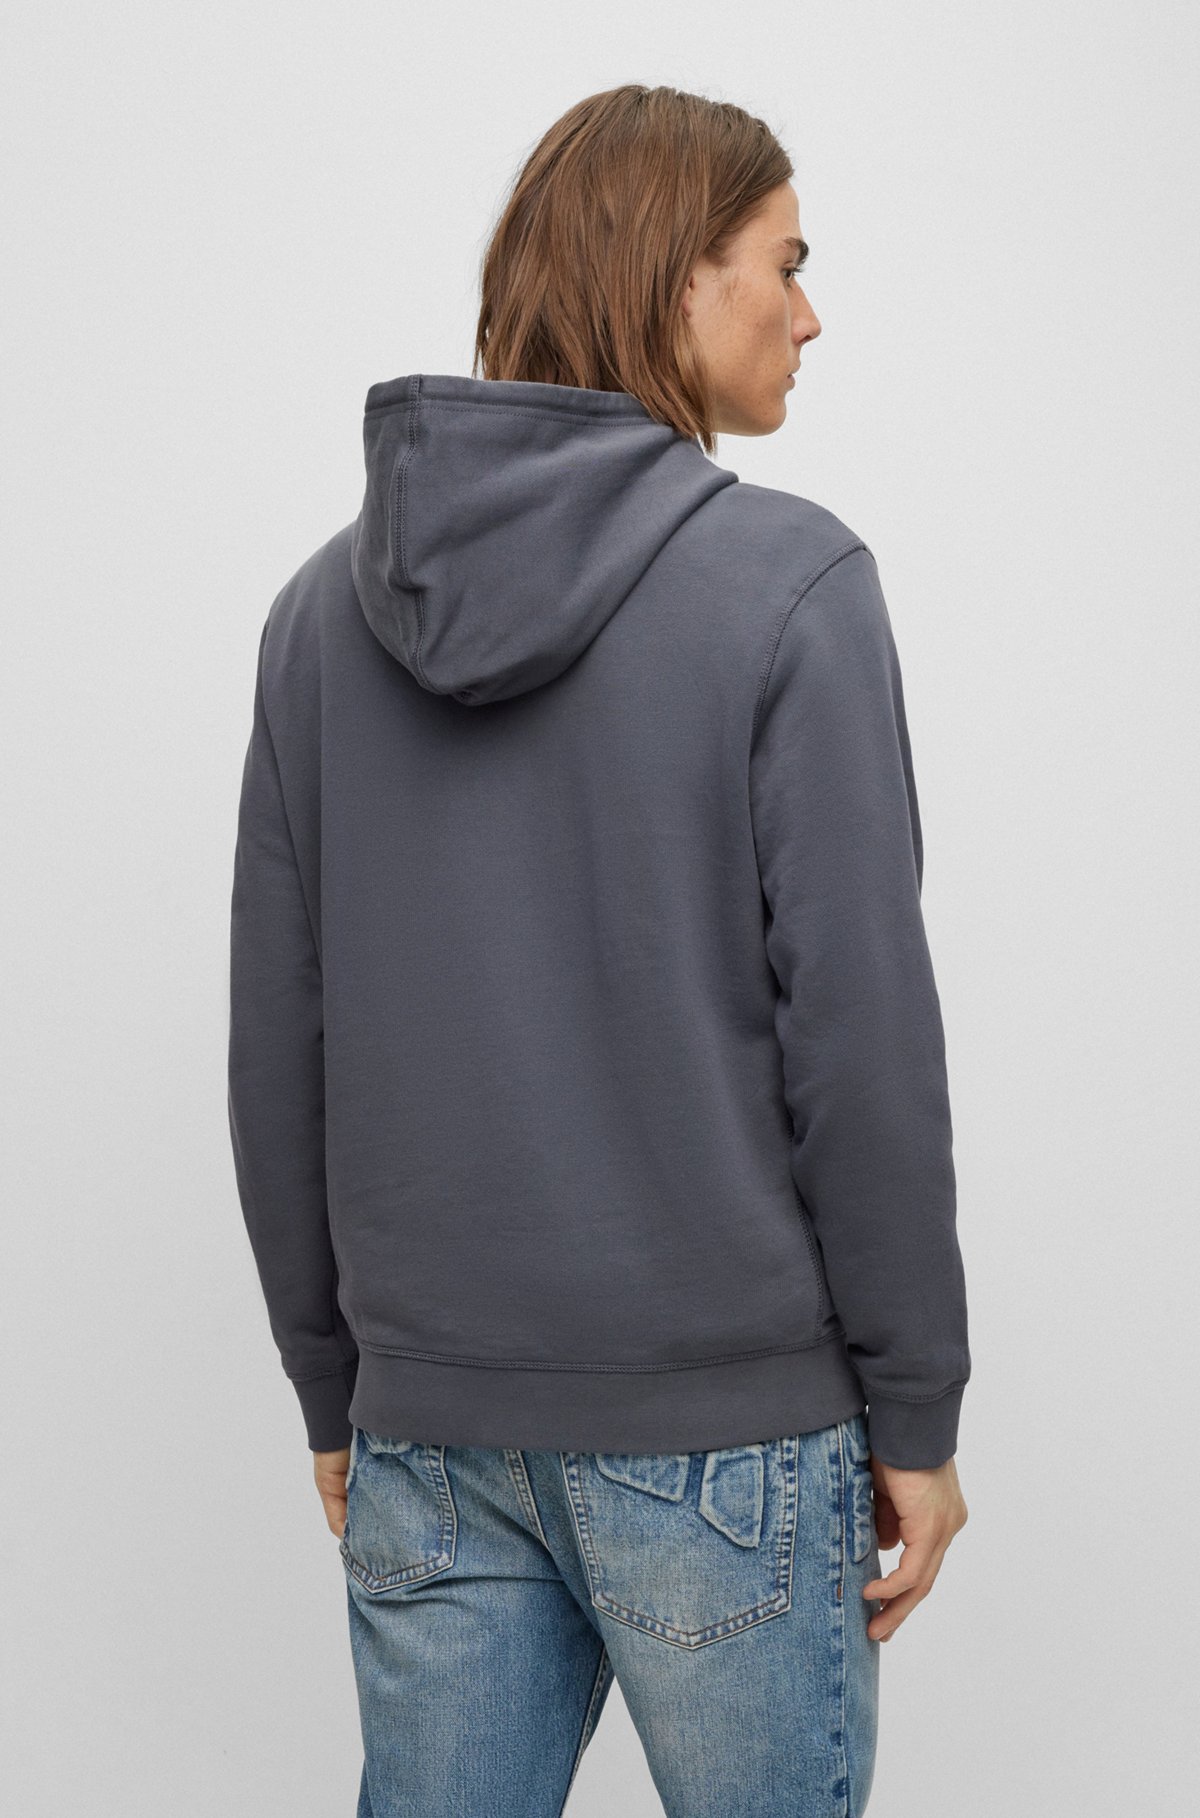 French-terry-cotton hooded sweatshirt with logo patch, Dark Grey